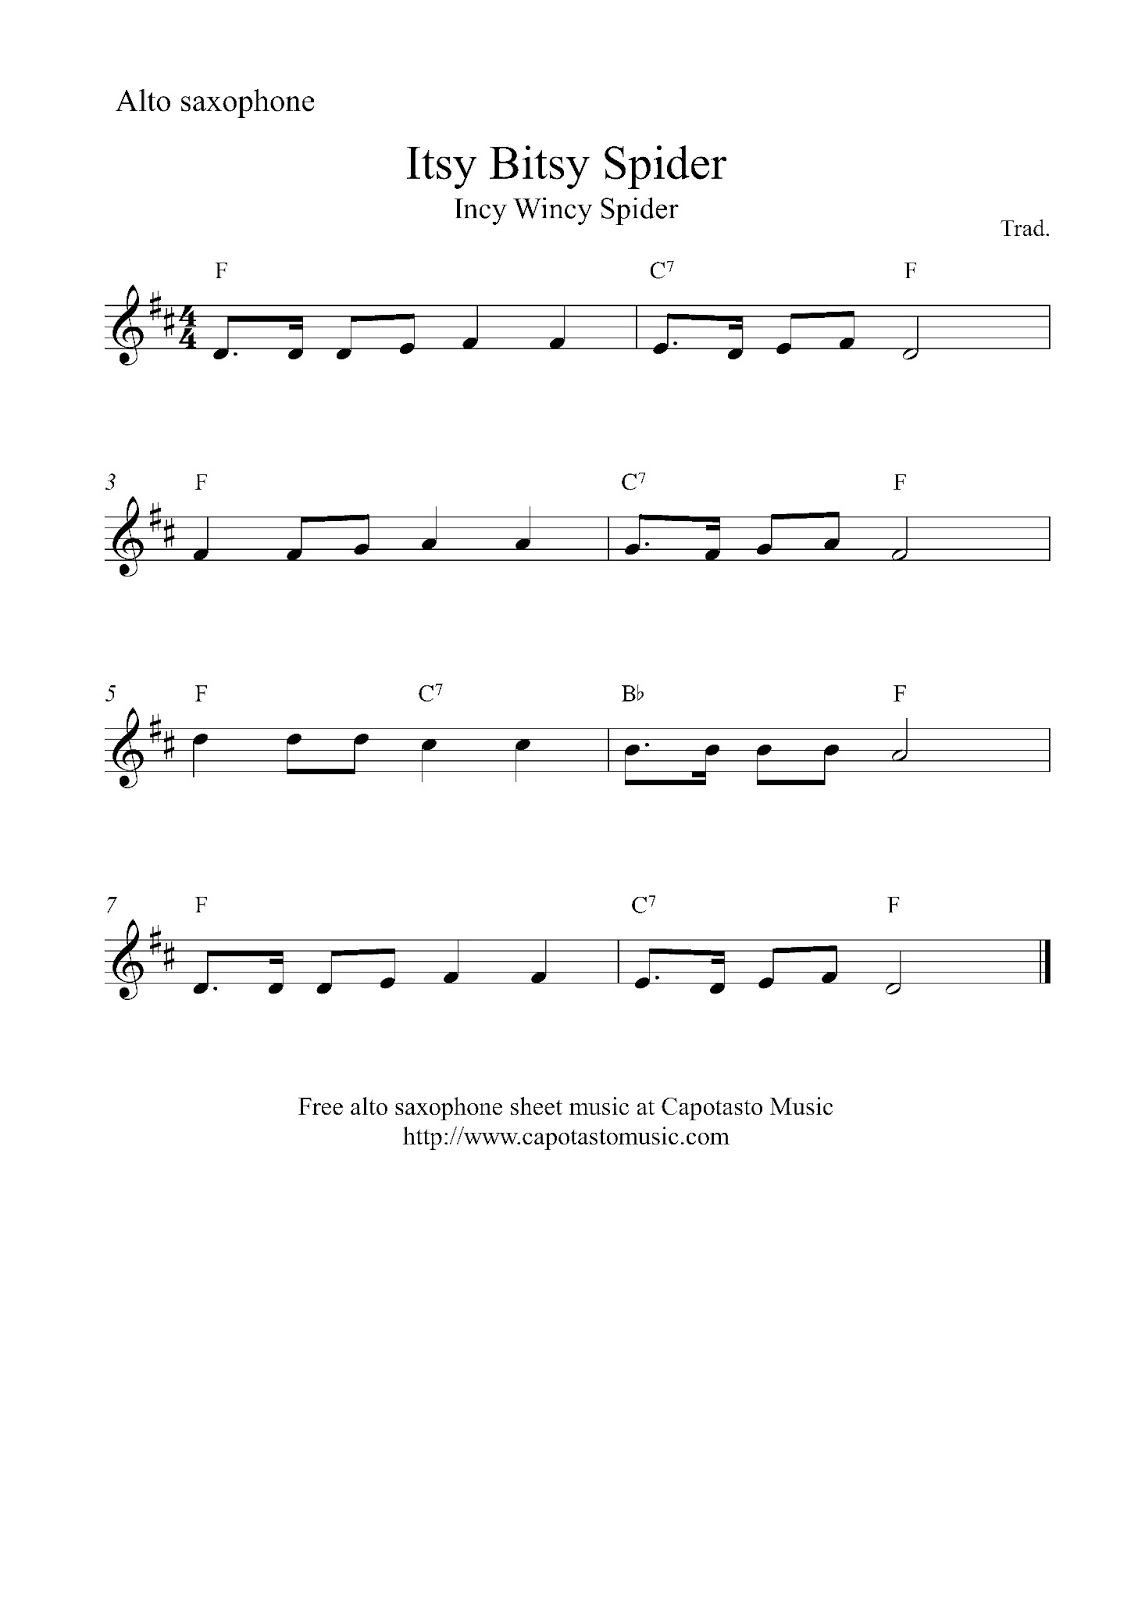 Free Easy Alto Saxophone Sheet Music Itsy Bitsy Spider Incy Wincy Spider 